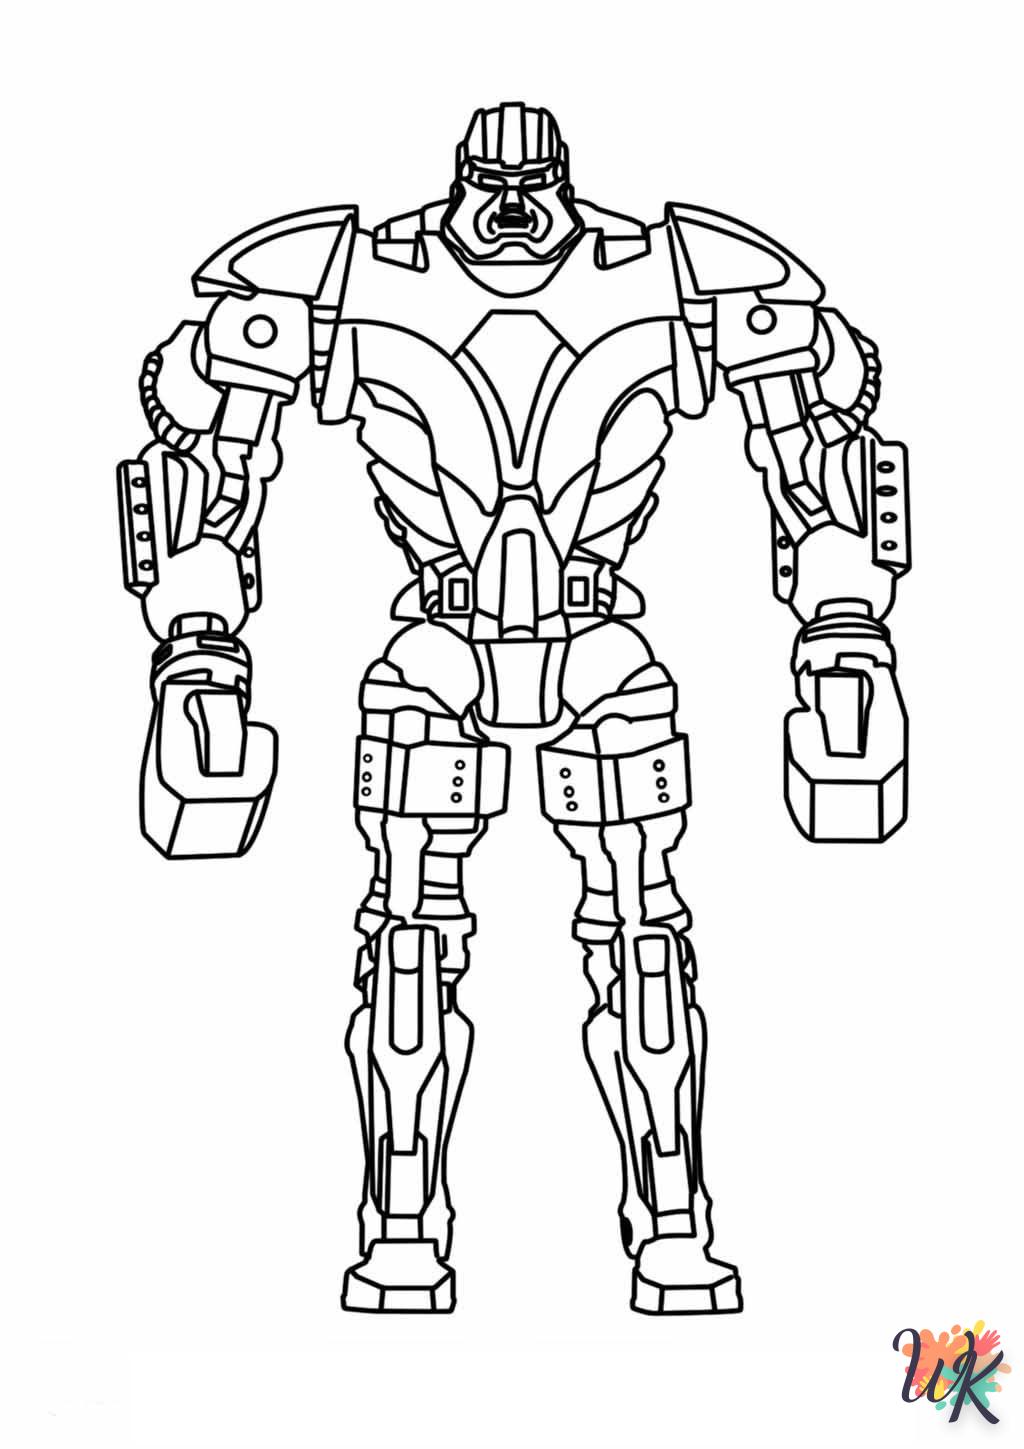 Robot coloring activity online 1